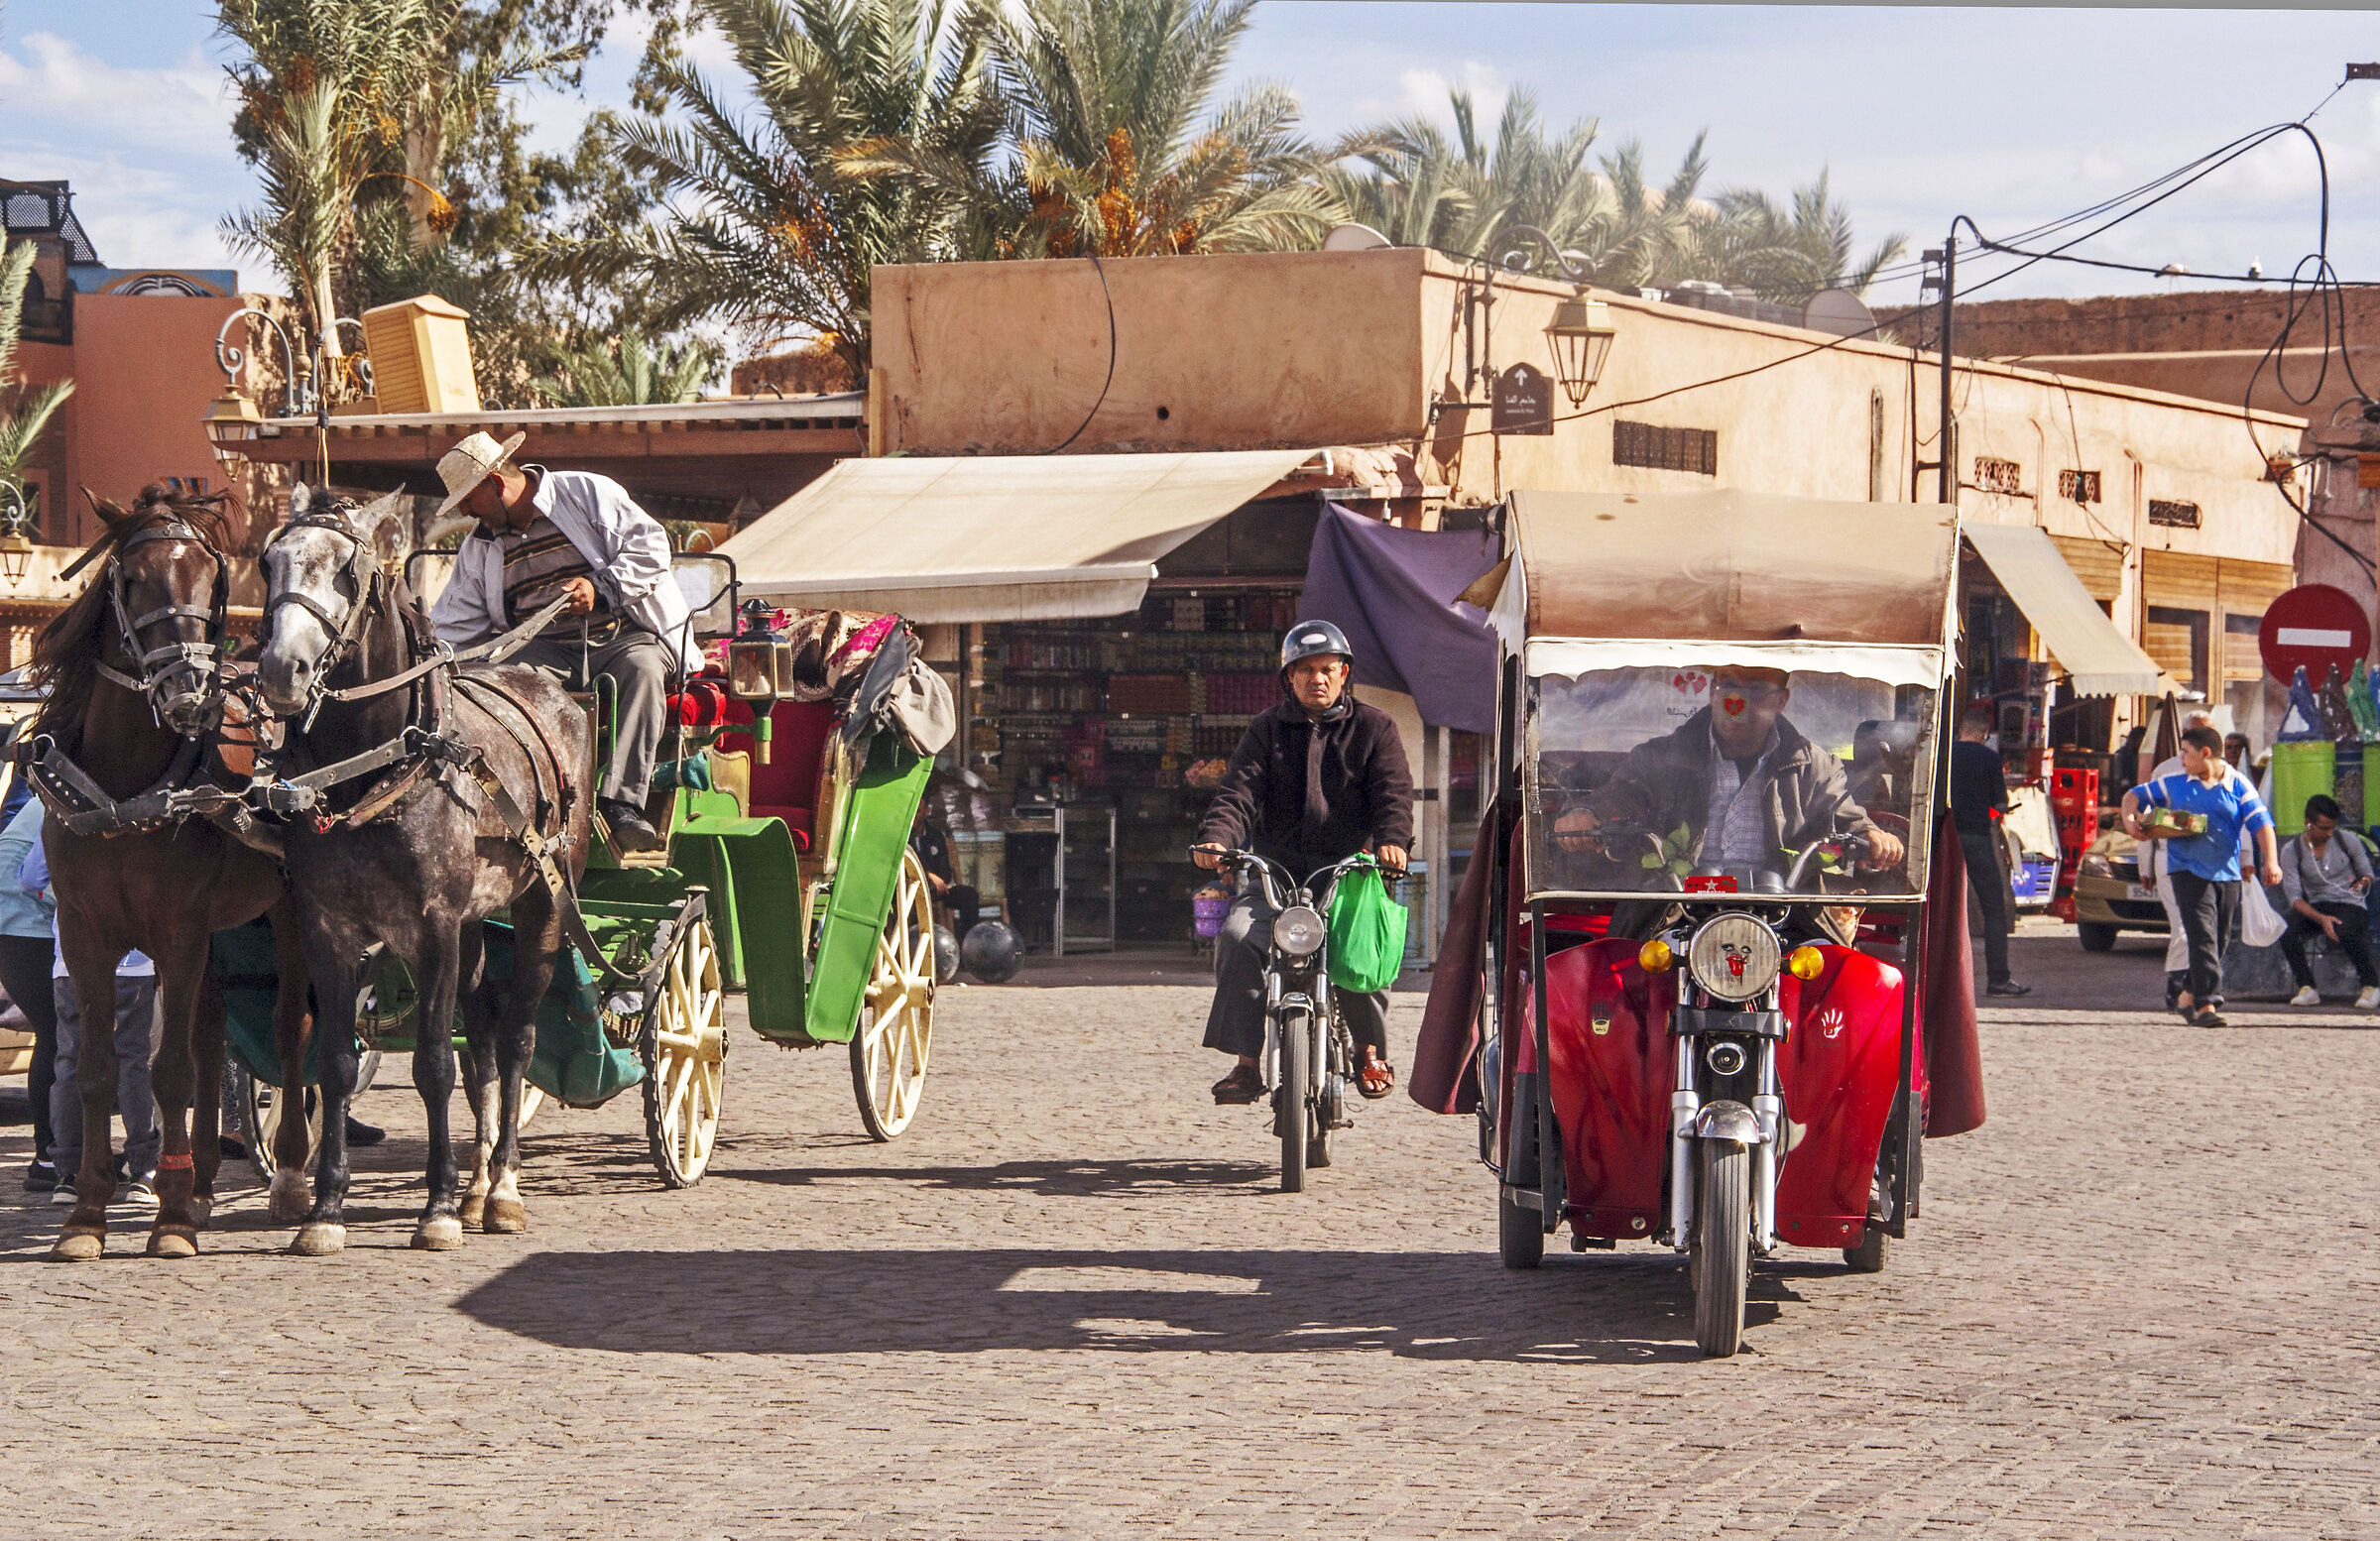 rush time in Marrakech...